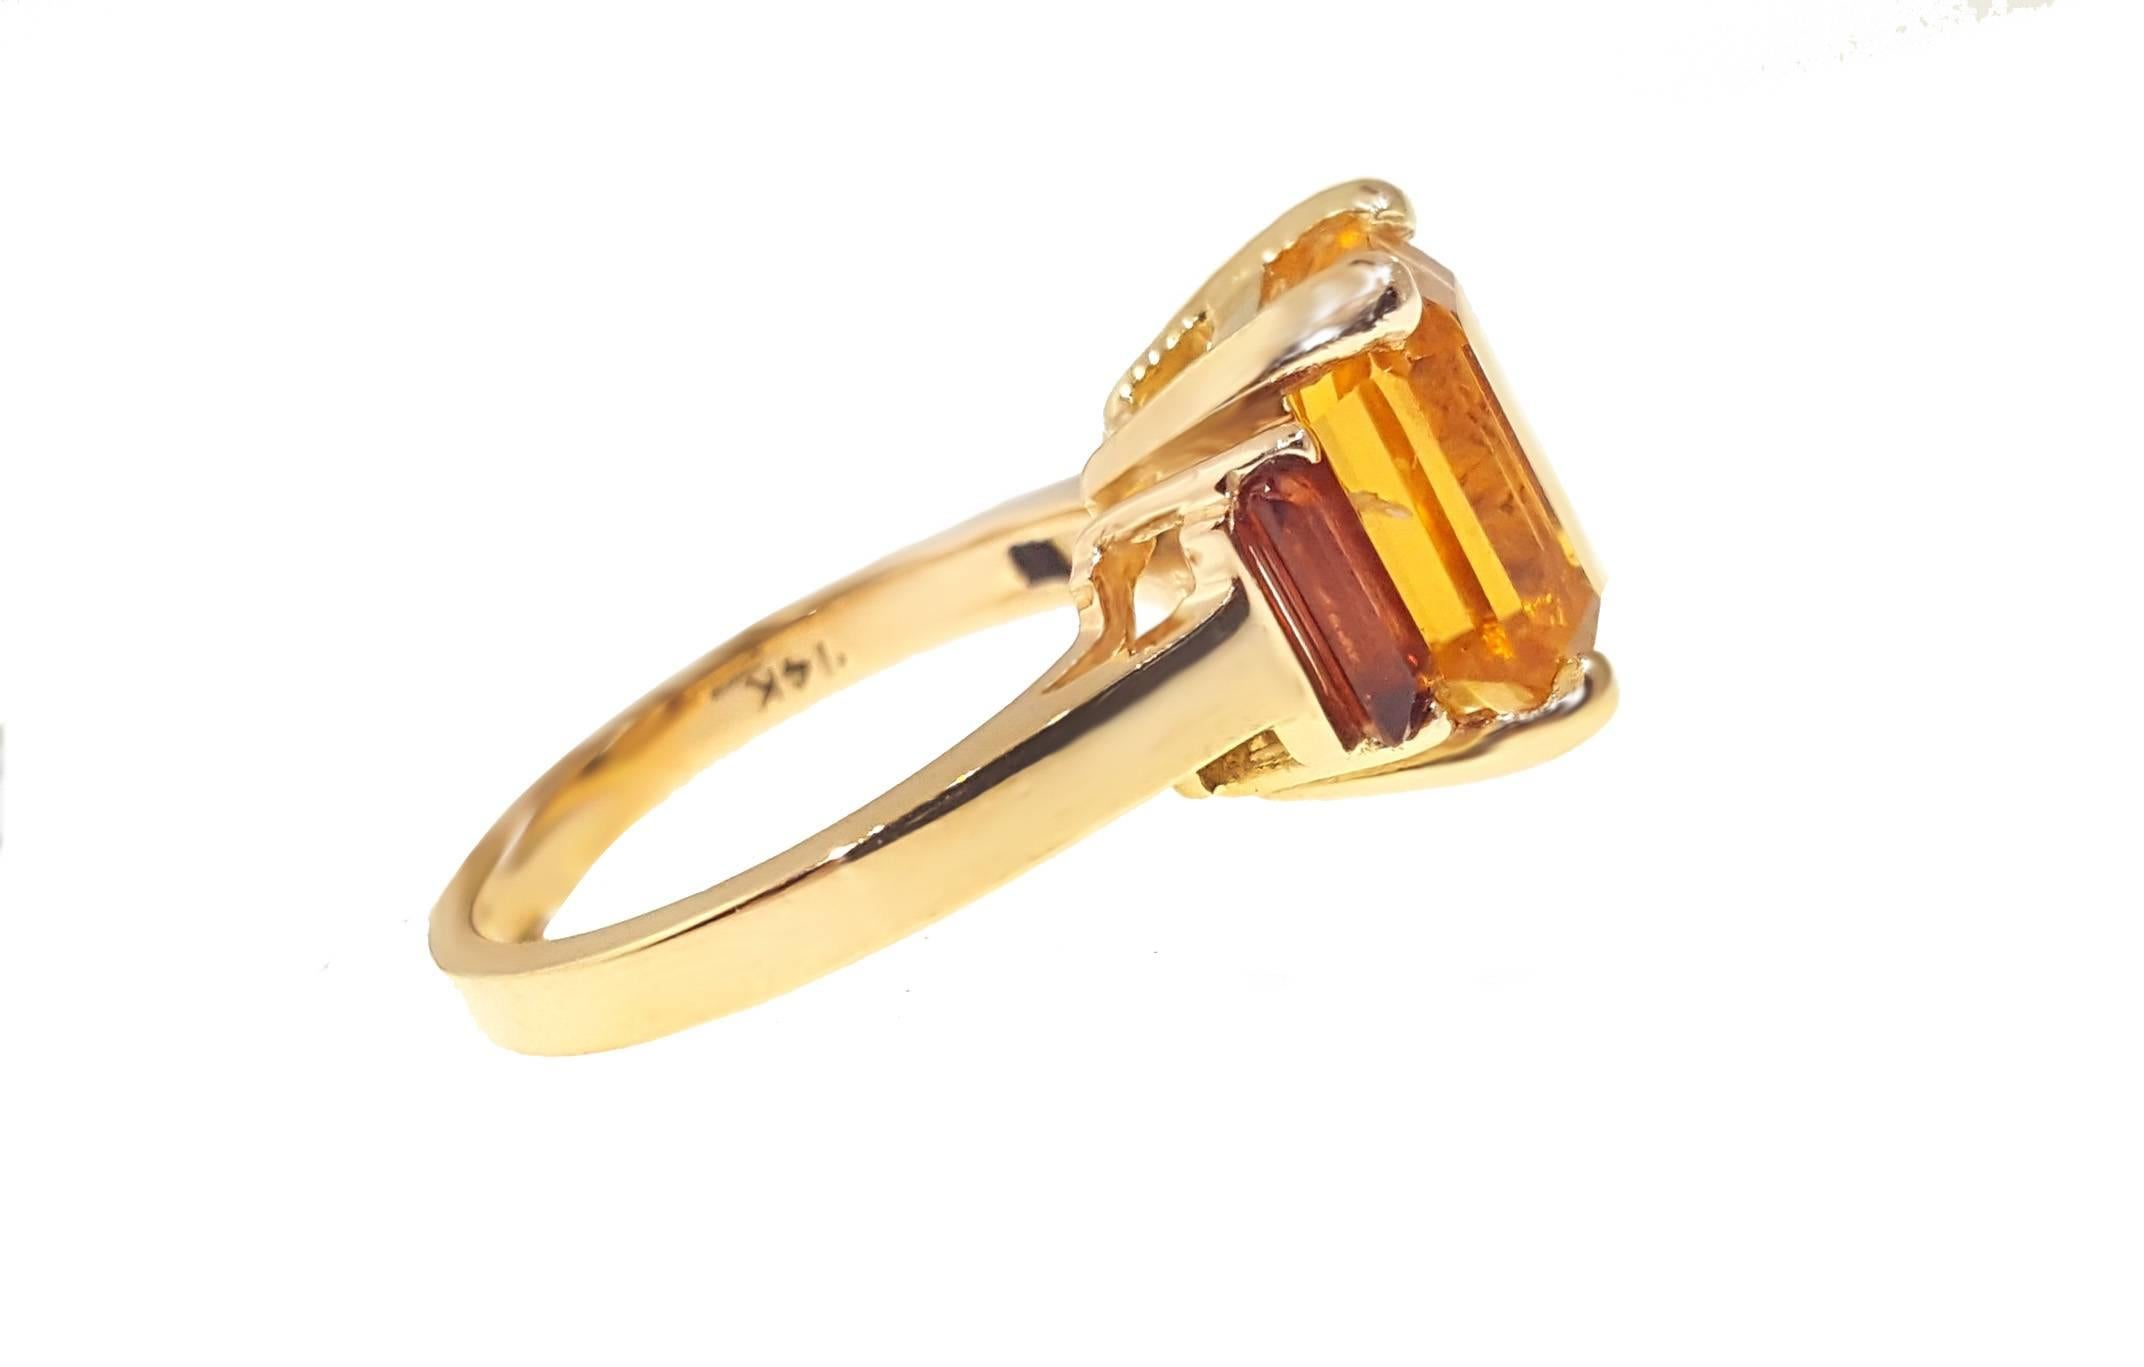 Fun retro style high polish 14kt yellow gold ring with a 3.57ct medium orangy-yellow natural citrine, accented by two dark red garnets.  The ring measures approximately 13.2mm x 10mm at the top and is a US size 6.5. 